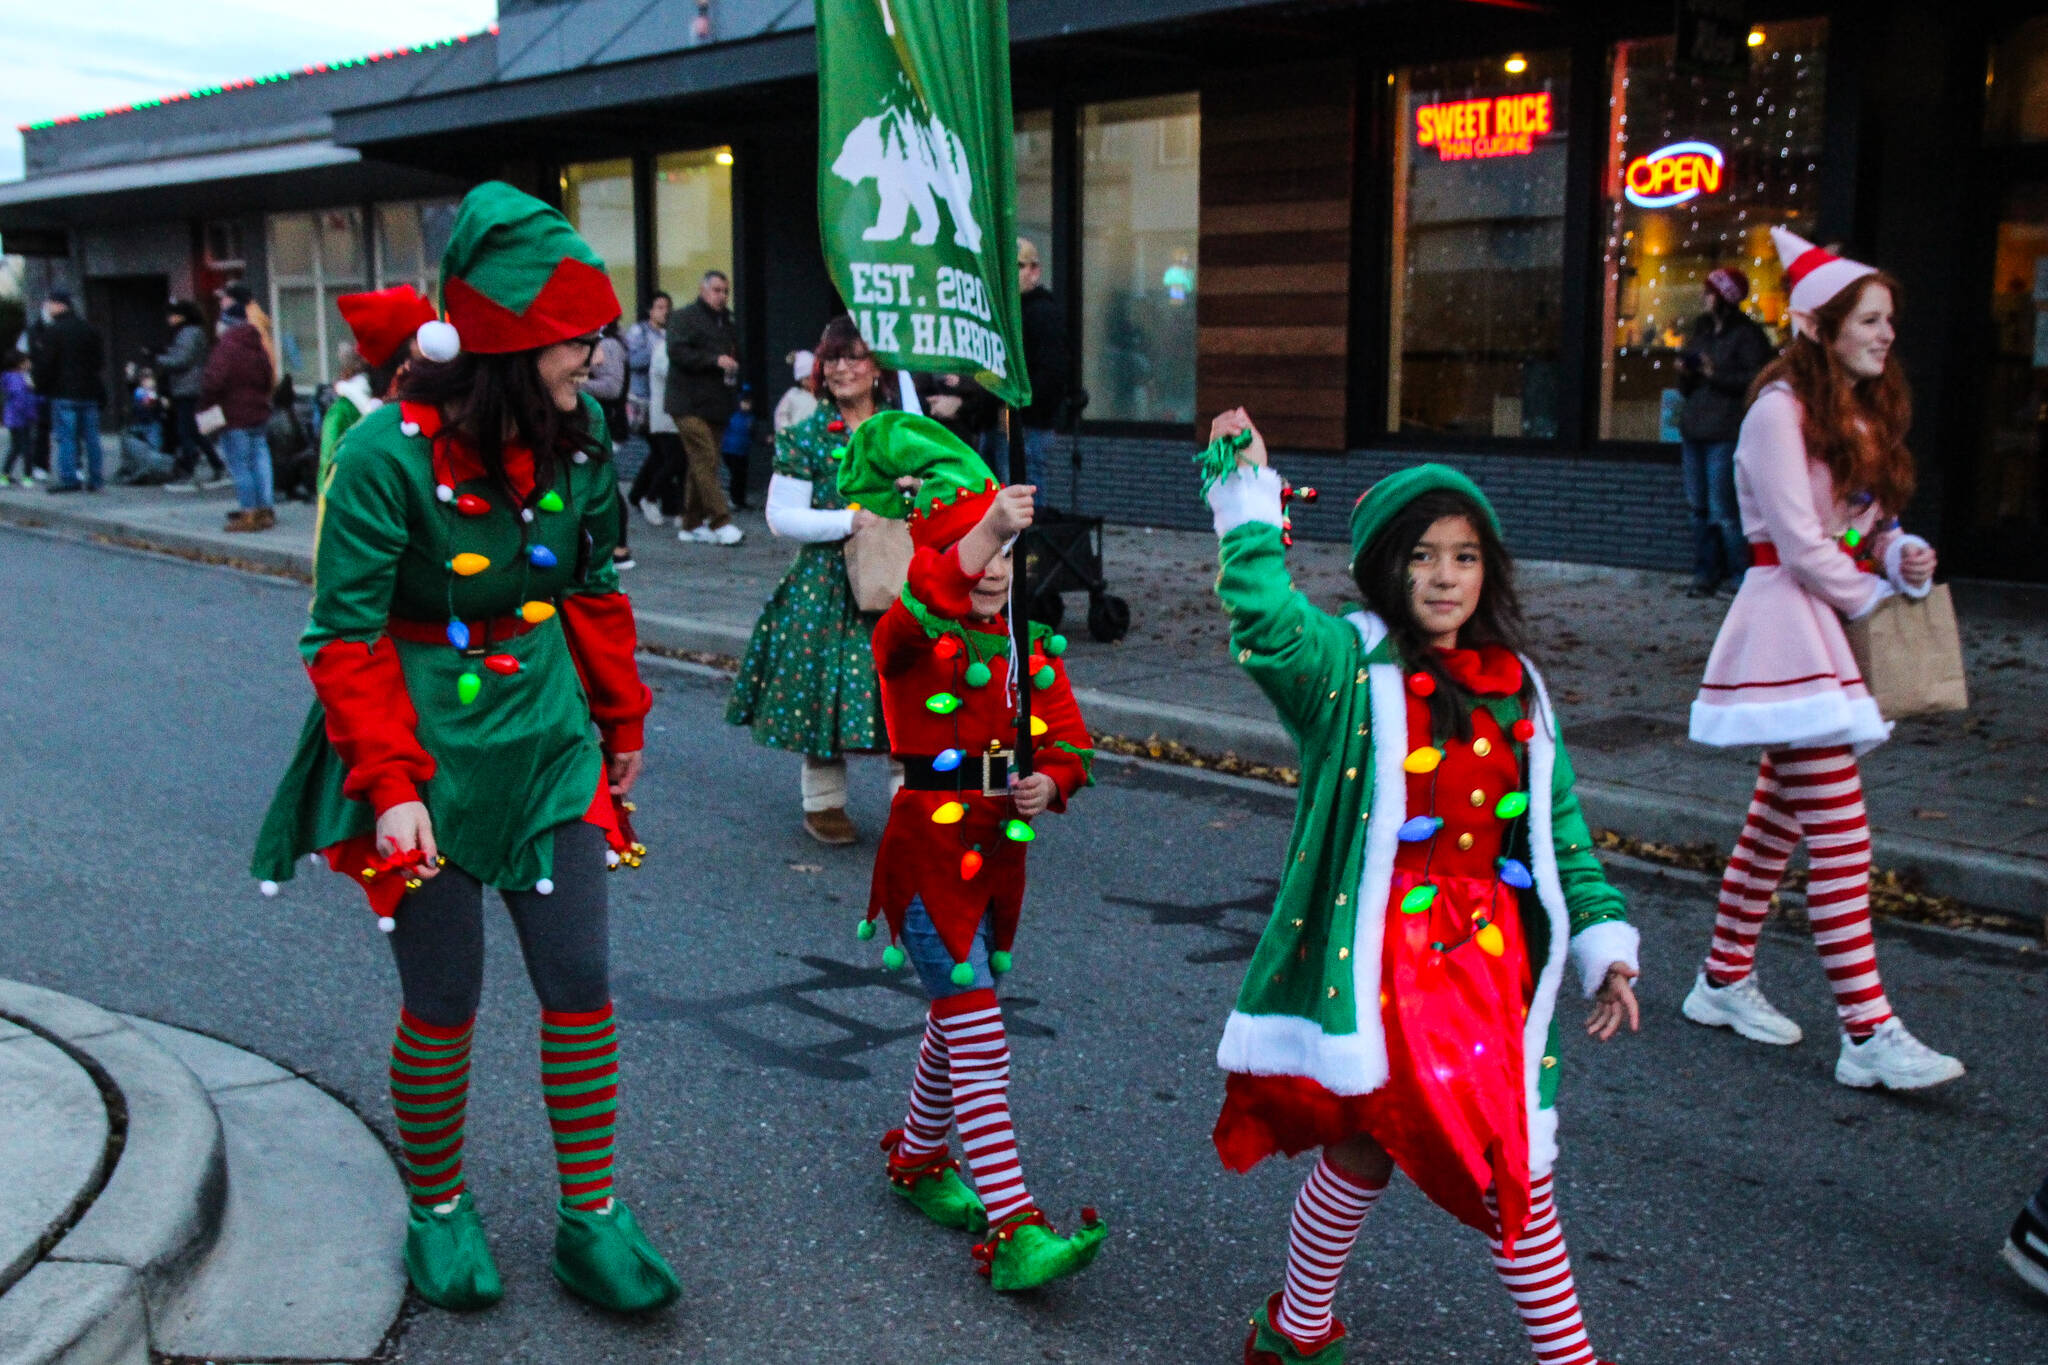 The Tipsy Jellifish’s elves parade on Pioneer Way on Dec. 2. (Photo by Luisa Loi)